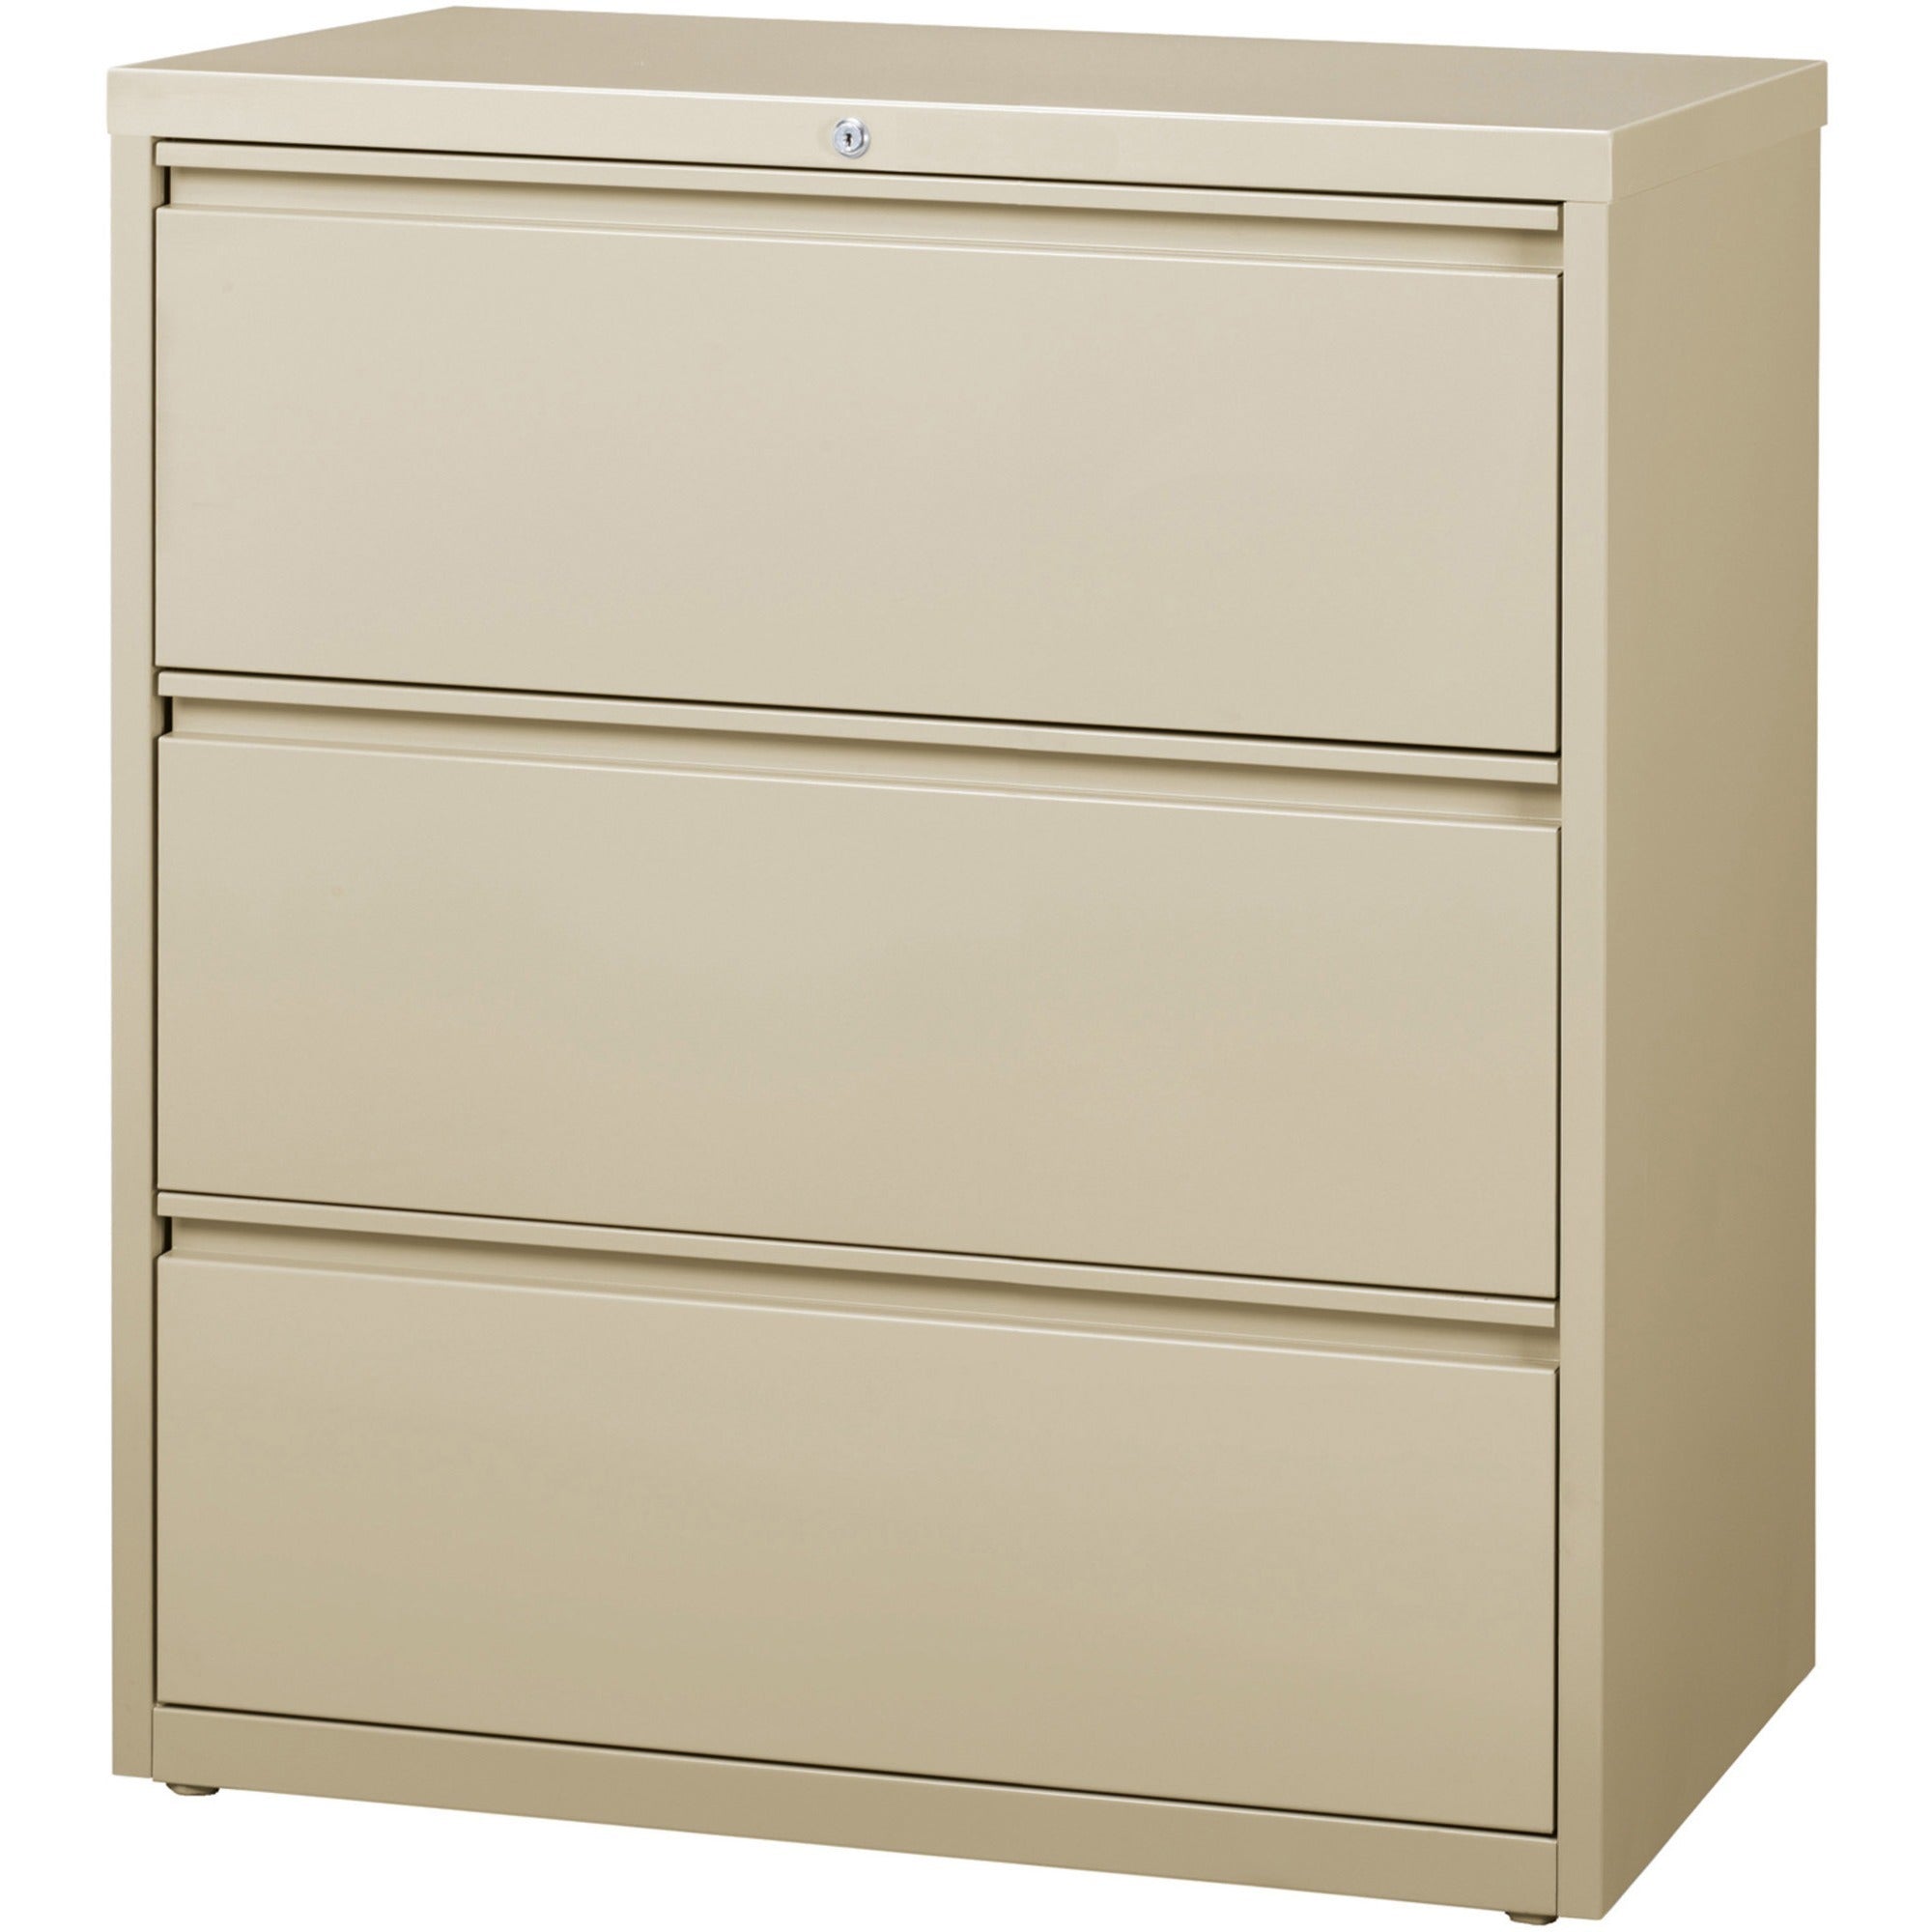 Lorell Fortress Series Lateral File - 36" x 18.6" x 40.3" - 3 x Drawer(s) for File - Letter, Legal, A4 - Lateral - Locking Drawer, Magnetic Label Holder, Ball-bearing Suspension, Leveling Glide - Putty - Steel - Recycled - 